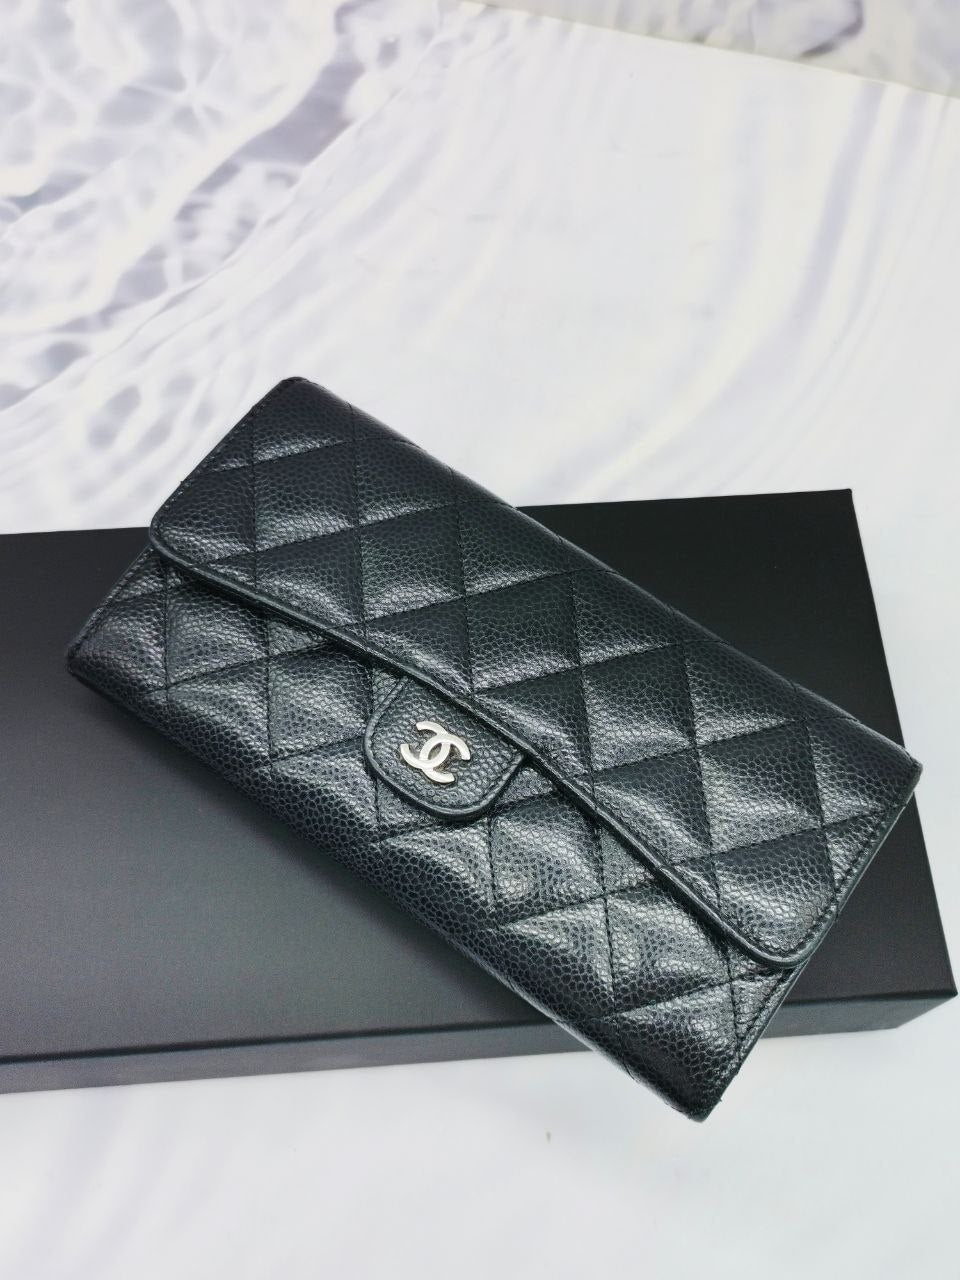 Chanel French Kisslock Caviar Leather Wallet